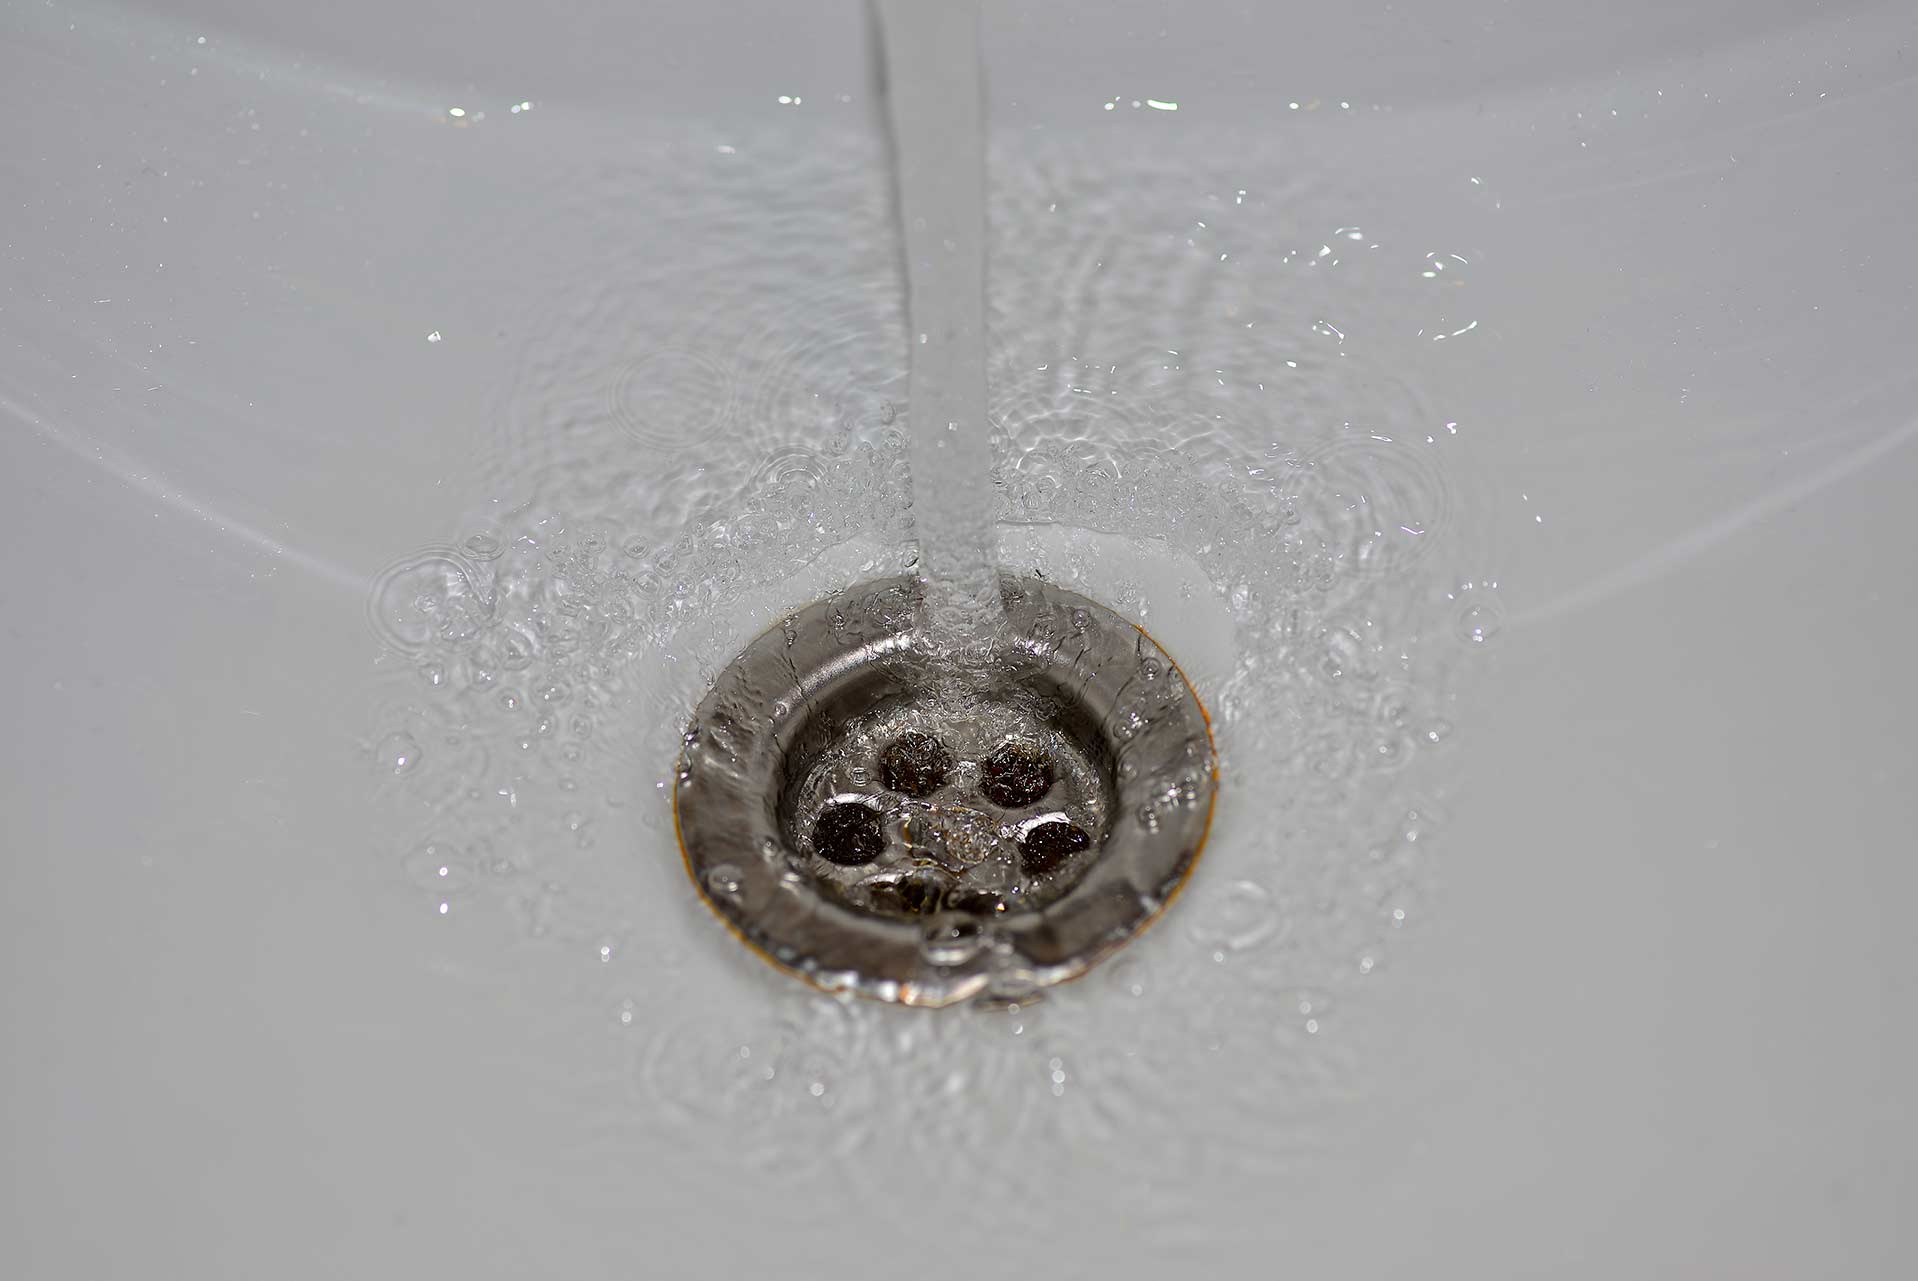 A2B Drains provides services to unblock blocked sinks and drains for properties in Middlesbrough.